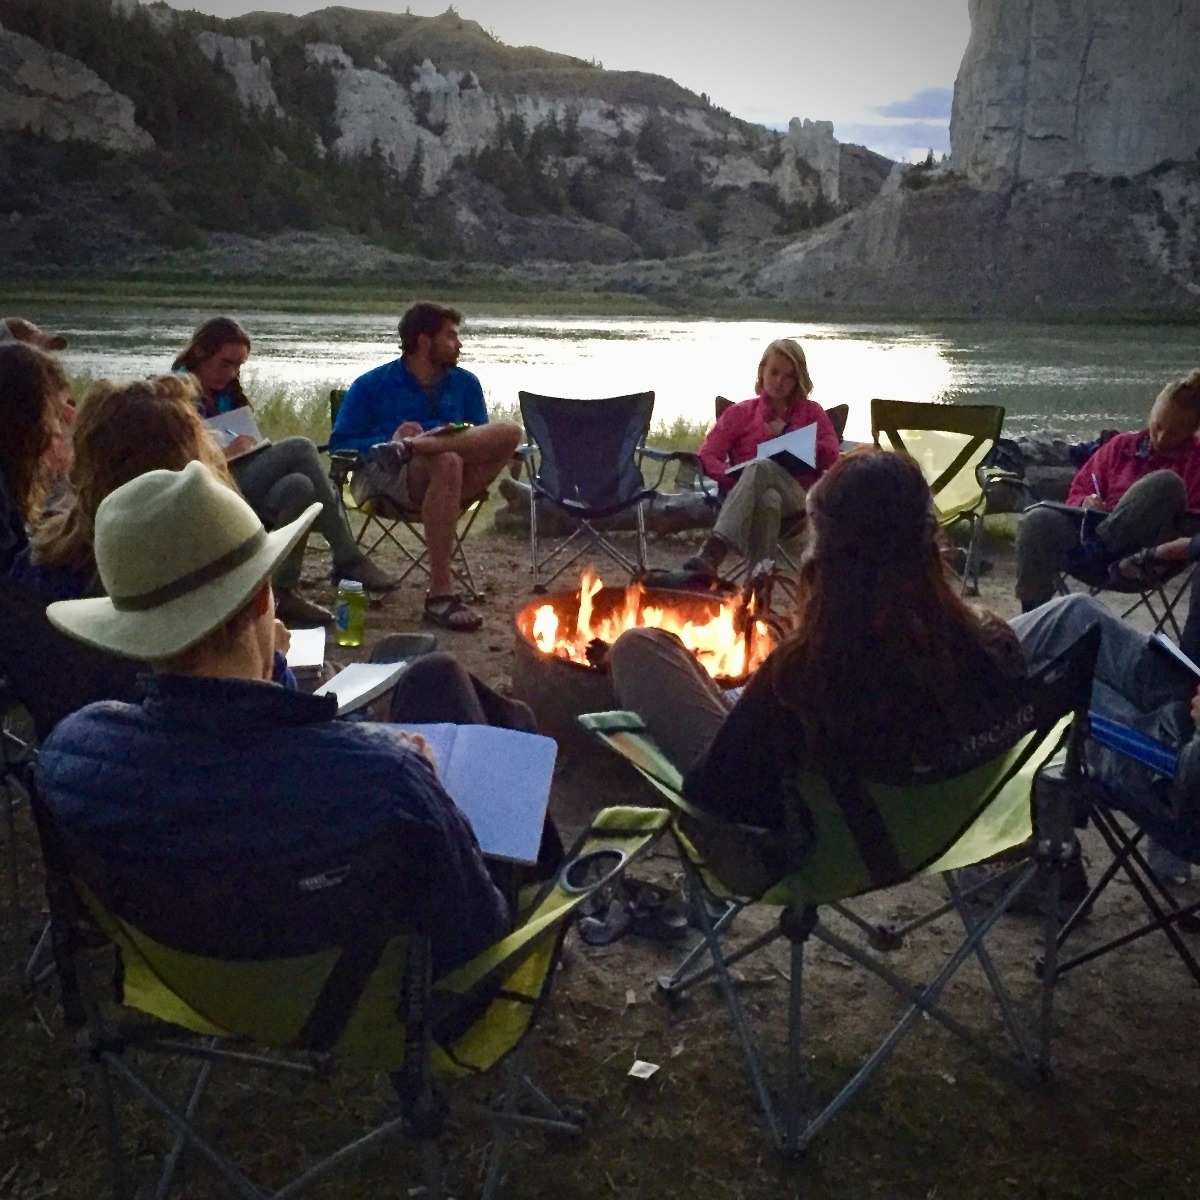 Whitman College's &quot;Semester in the West&quot; students, also known as &quot;Westies,&quot; gather to discuss events of the day. Every evening, students come together in a circle and share observations.  They are camped along the Upper Missouri River in Montana discussing the indigenous West, Lewis &amp; Clark, and the Upper Missouri River Breaks National Monument.  Semester in the West, which involves students ground-truthing myth, legend, culture and politics, is led by Snow's colleague, Phil Brick, but together, at the campus in Walla Walla, Washington, they and colleagues have tried to build a place-based curriculum. Photo by Todd Wilkinson